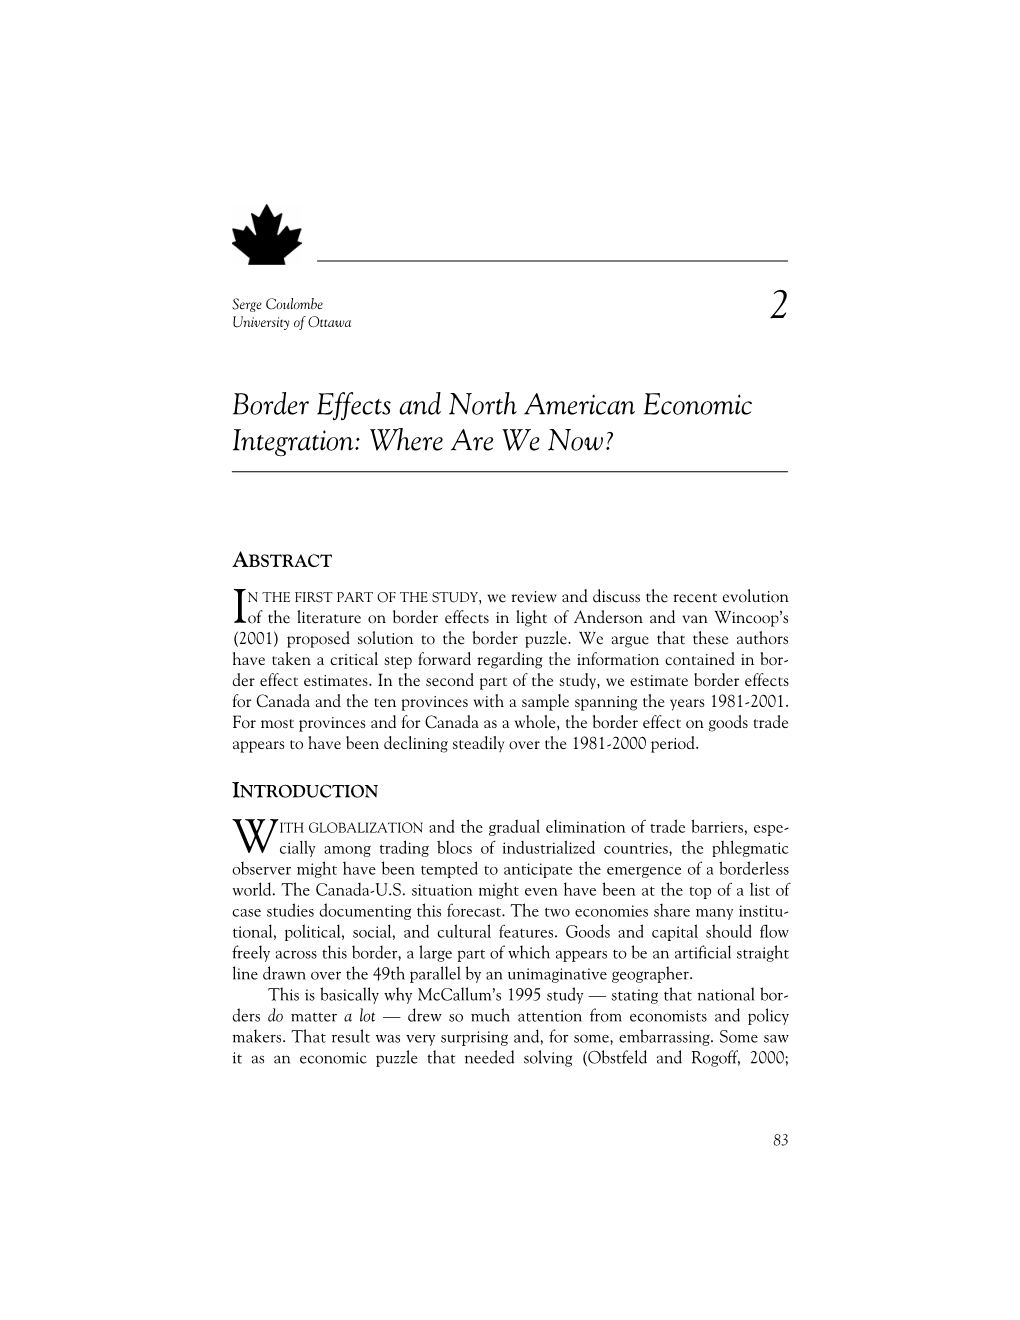 Border Effects and North American Economic Integration: Where Are We Now?